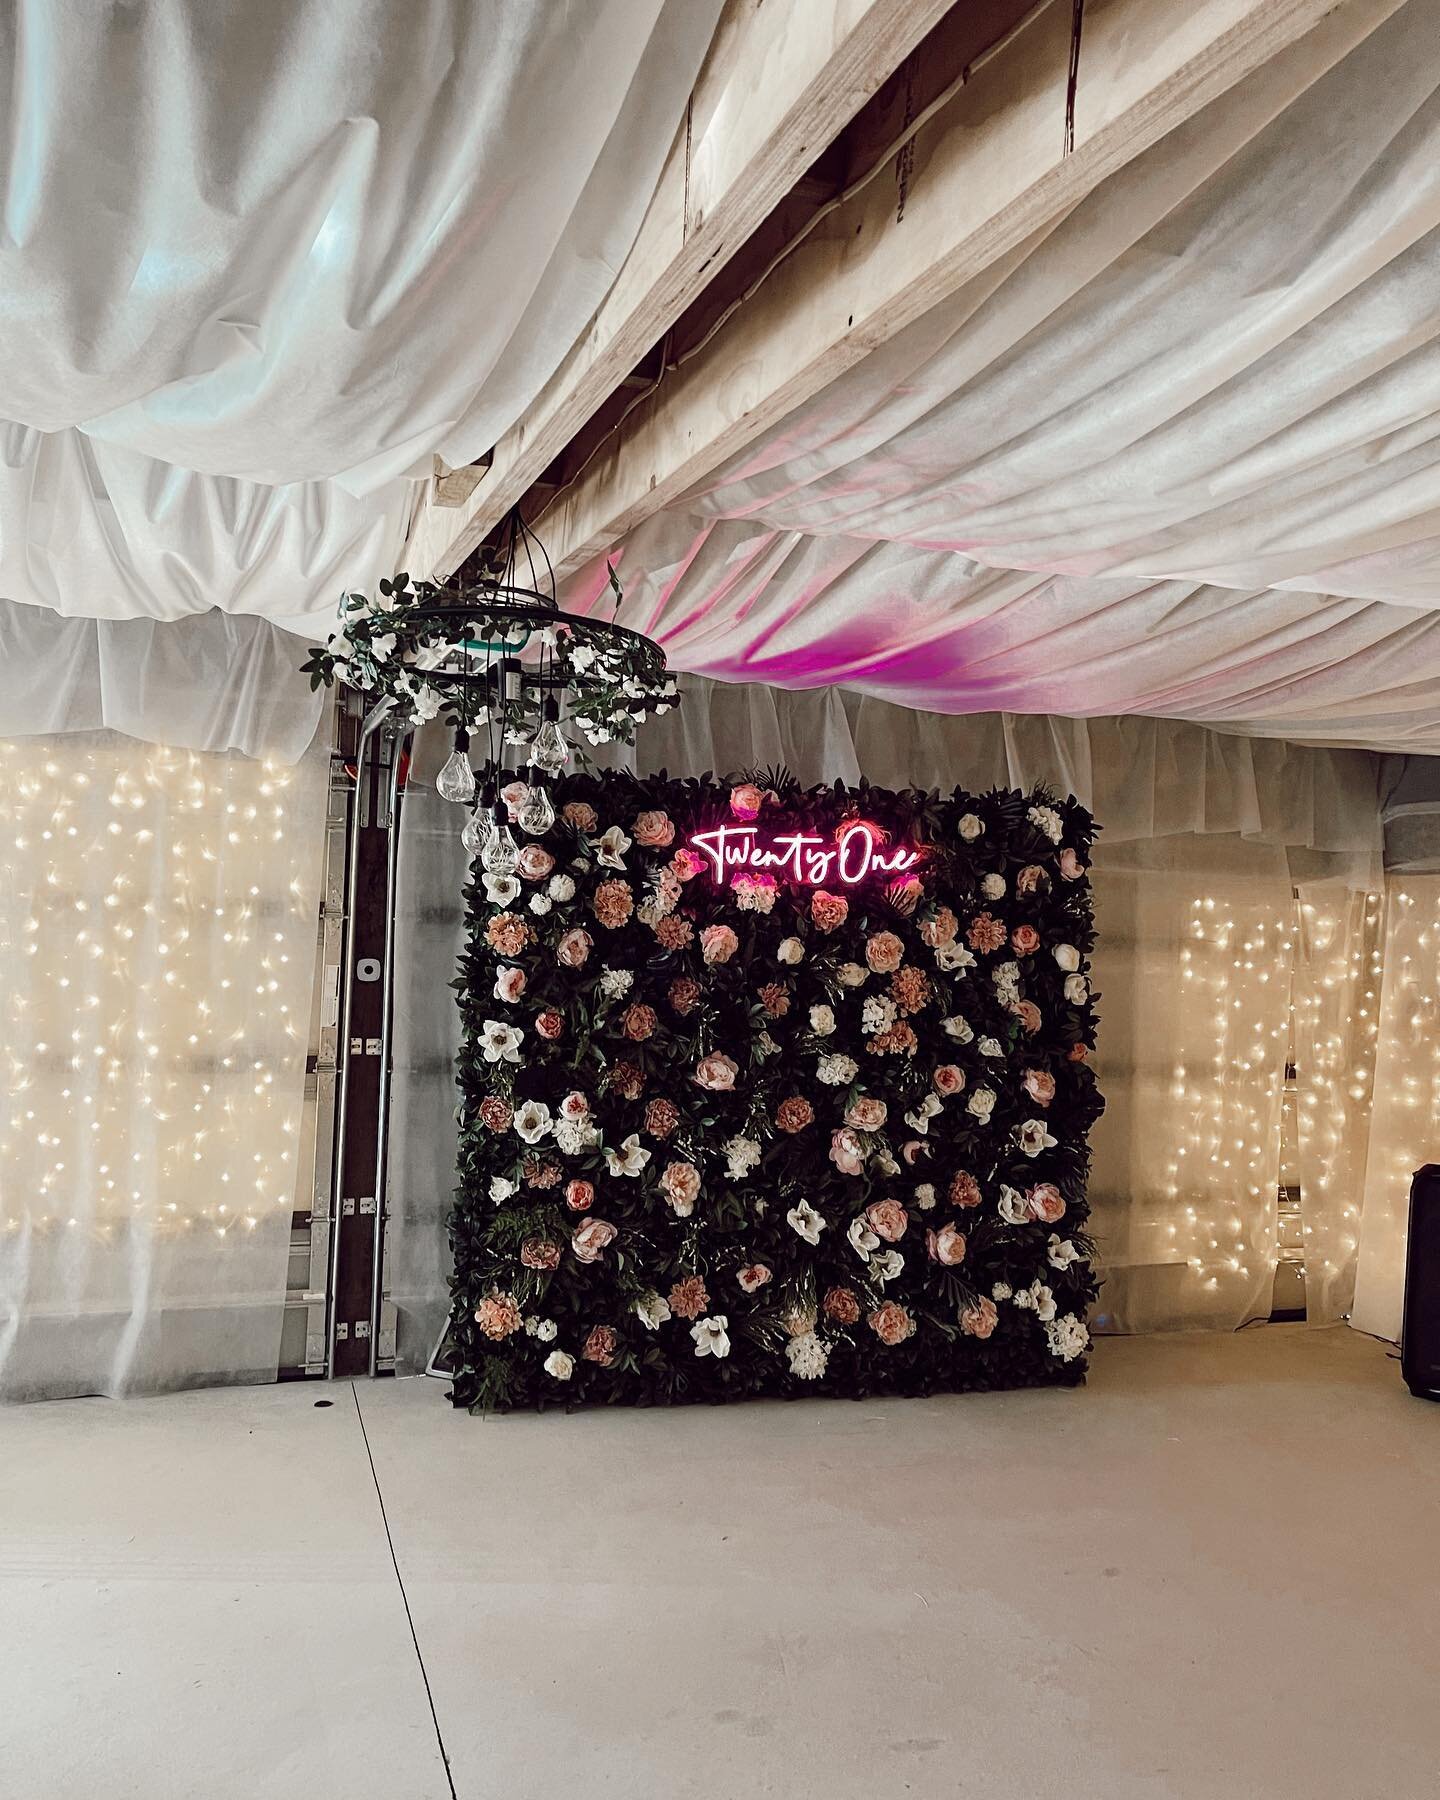 &mdash;&mdash; garage party done right ✔️ 

Talk about a total makeover! When we arrived most of the work was already done to turn this into a dreamy party space &mdash;&mdash; the finishing touch is our floral backdrop &amp; gorgeous neon ✨